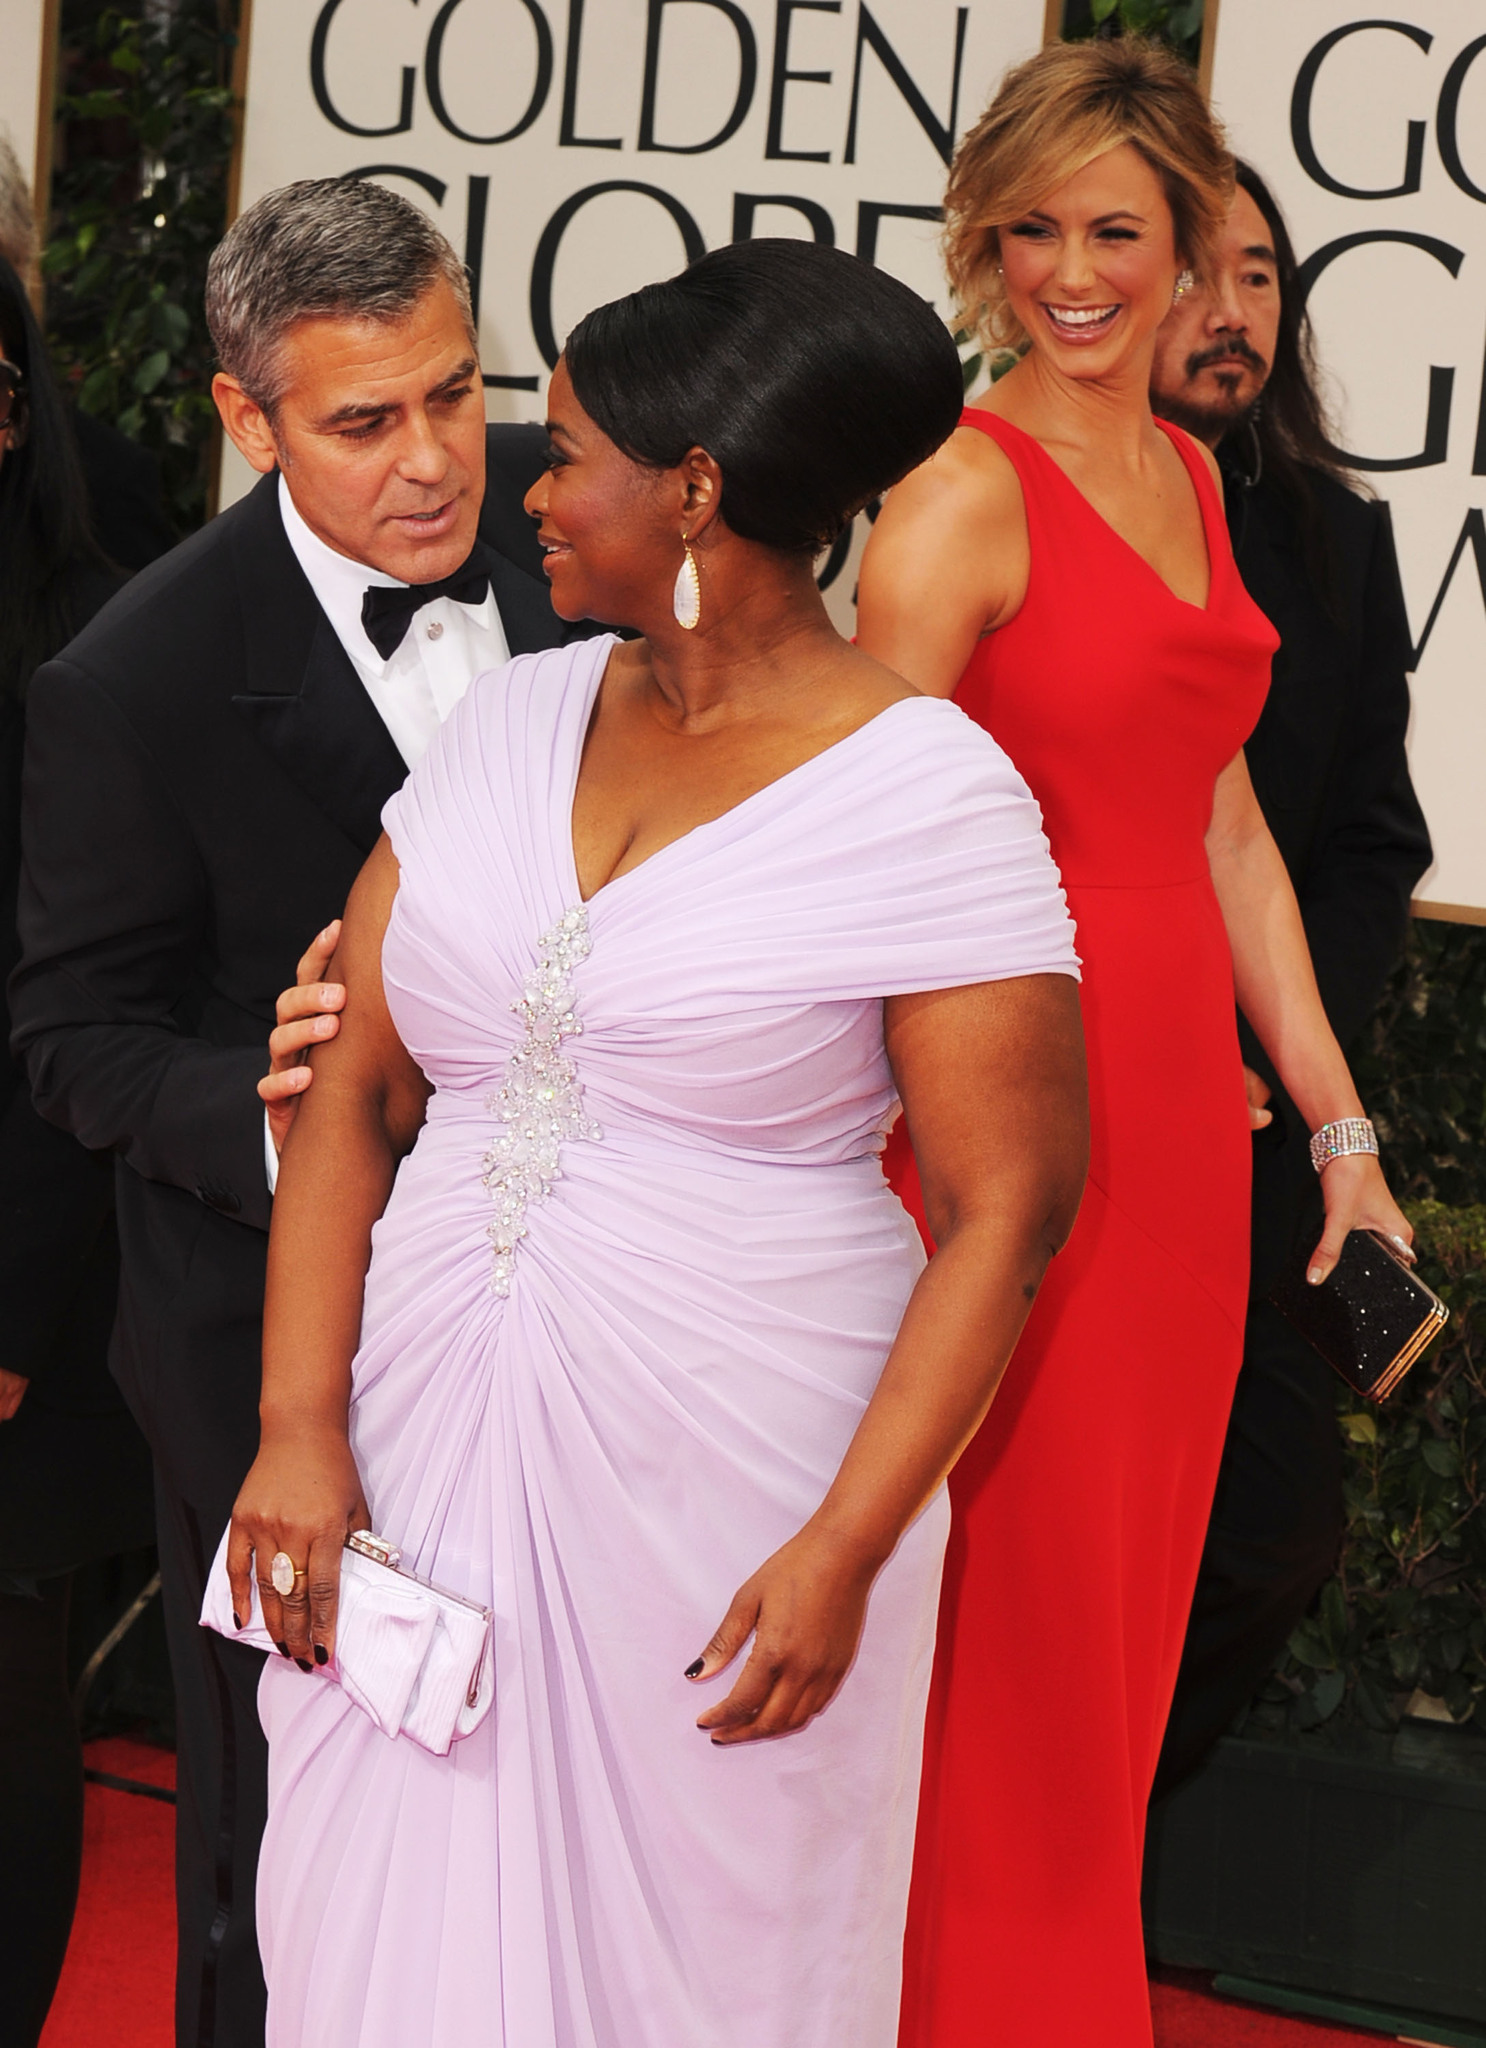 George Clooney, Stacy Keibler and Octavia Spencer